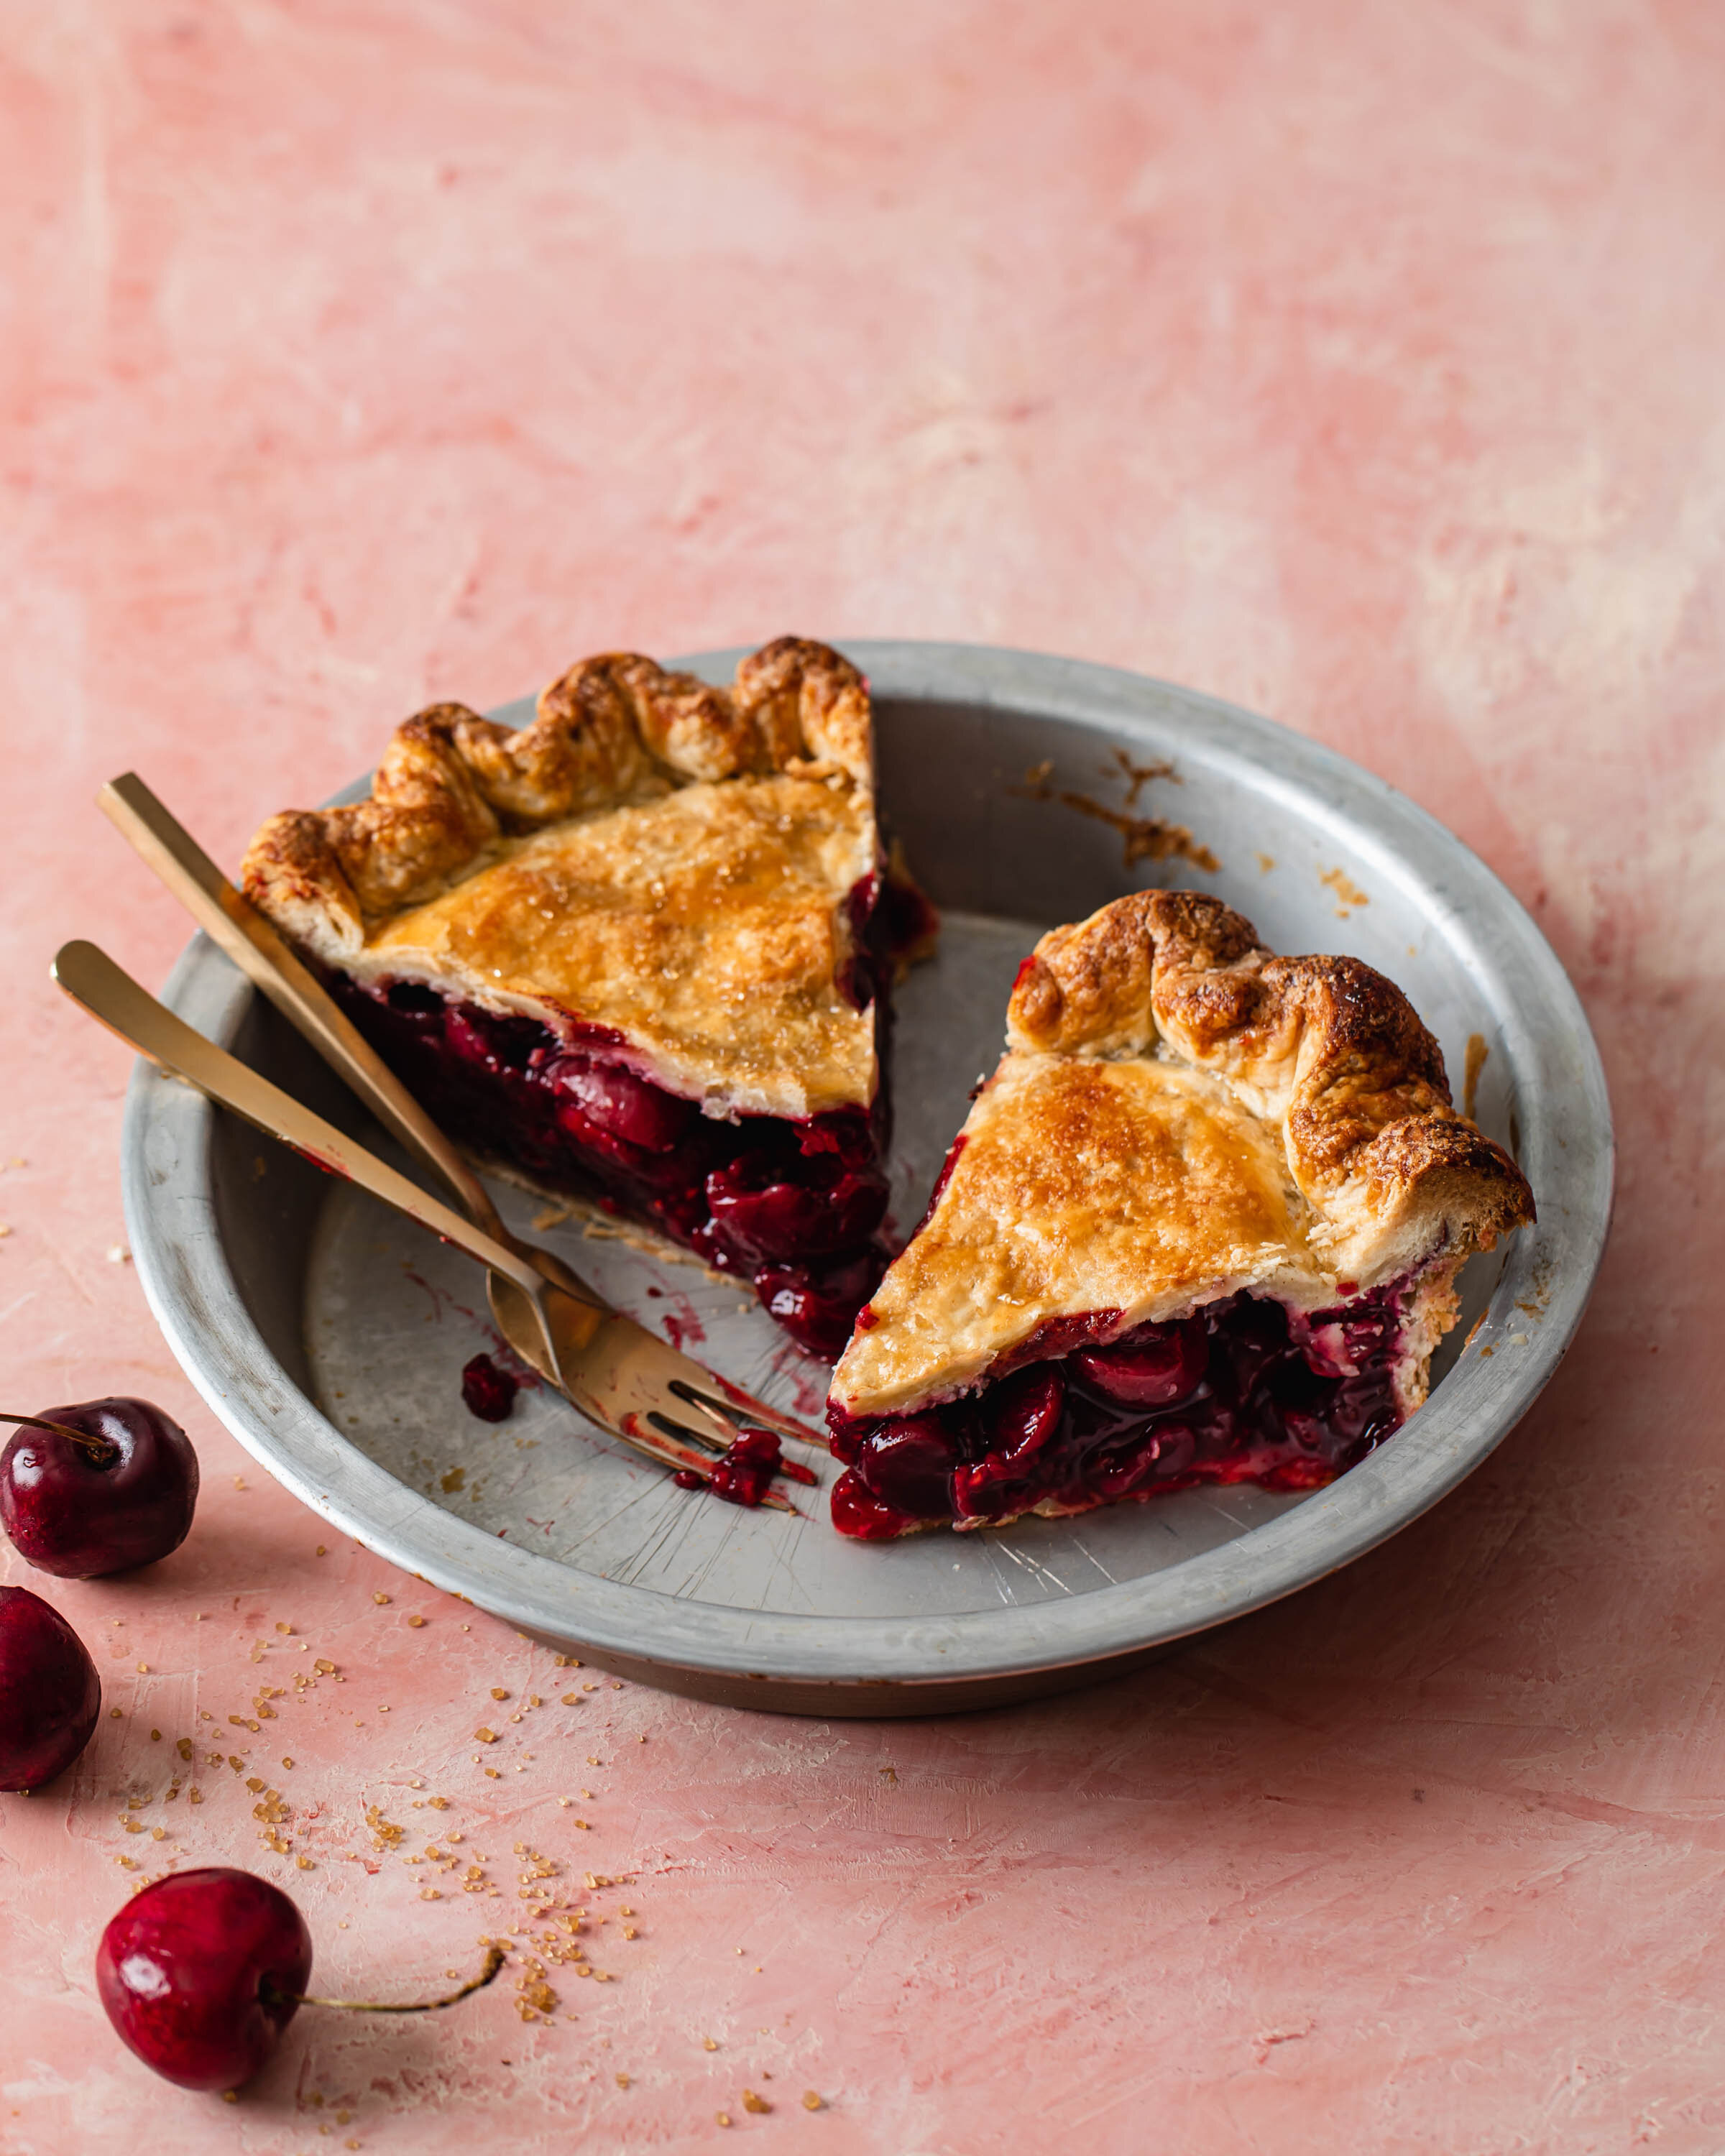 Two slices of homemade cherry pie with bright sweet cherry filling and flaky,  all-butter crust